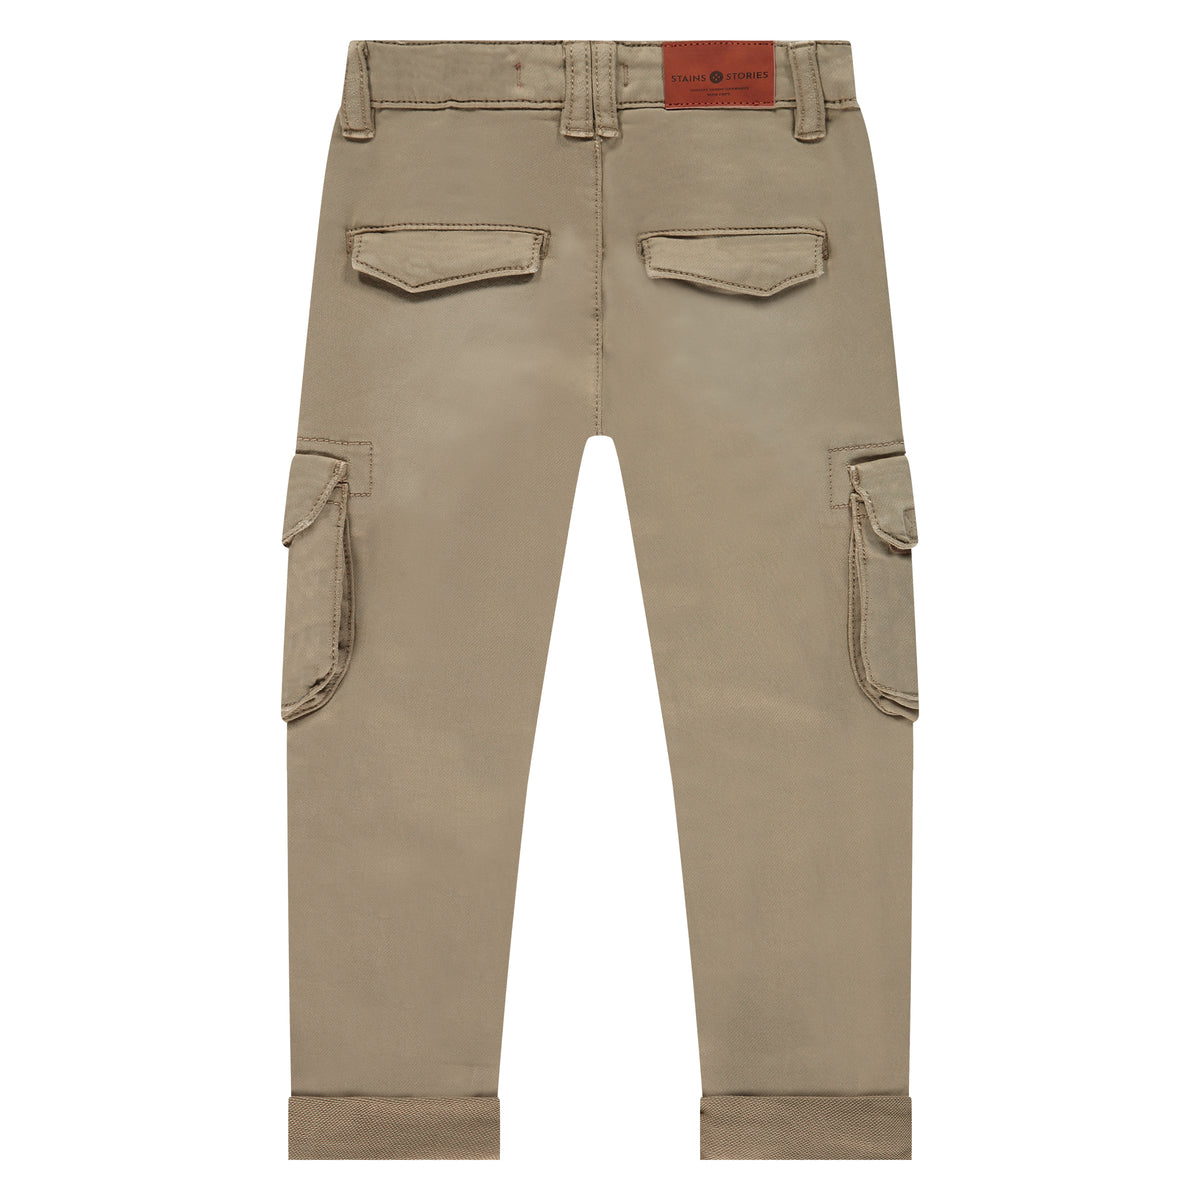 Boys worker pants sand, Stains & Stories